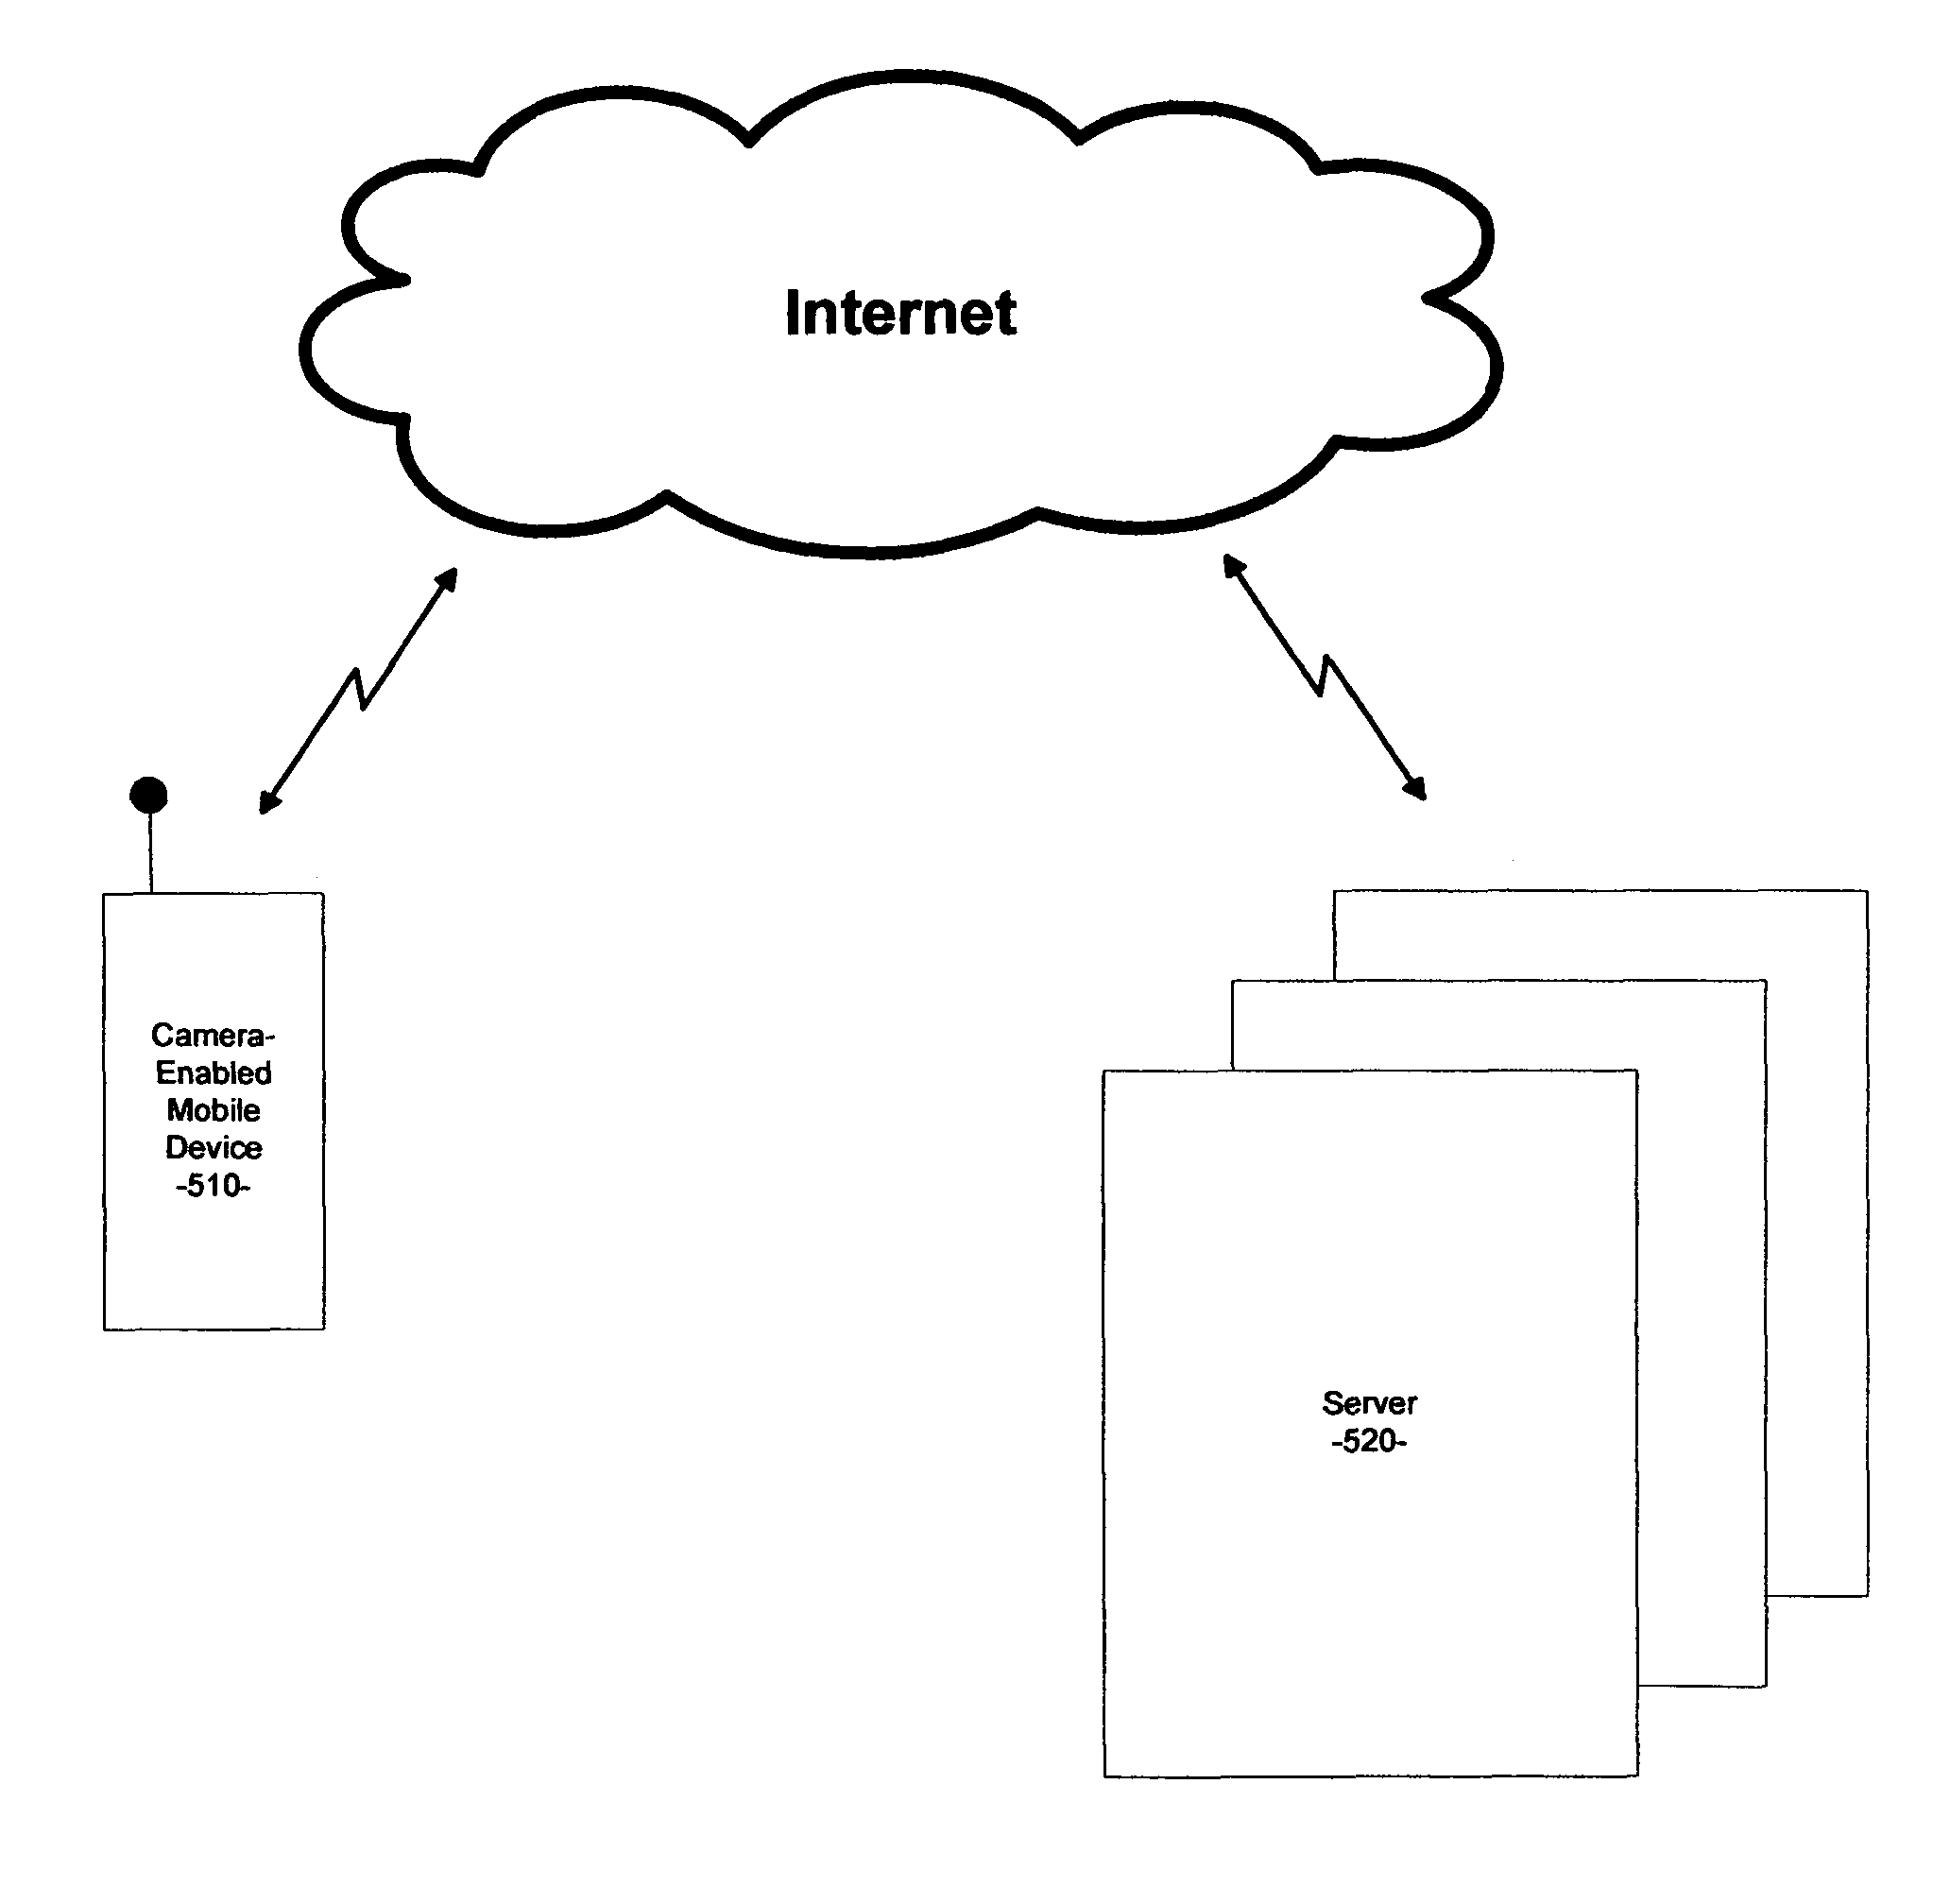 Computer-implemented system and method for notifying users upon the occurrence of an event